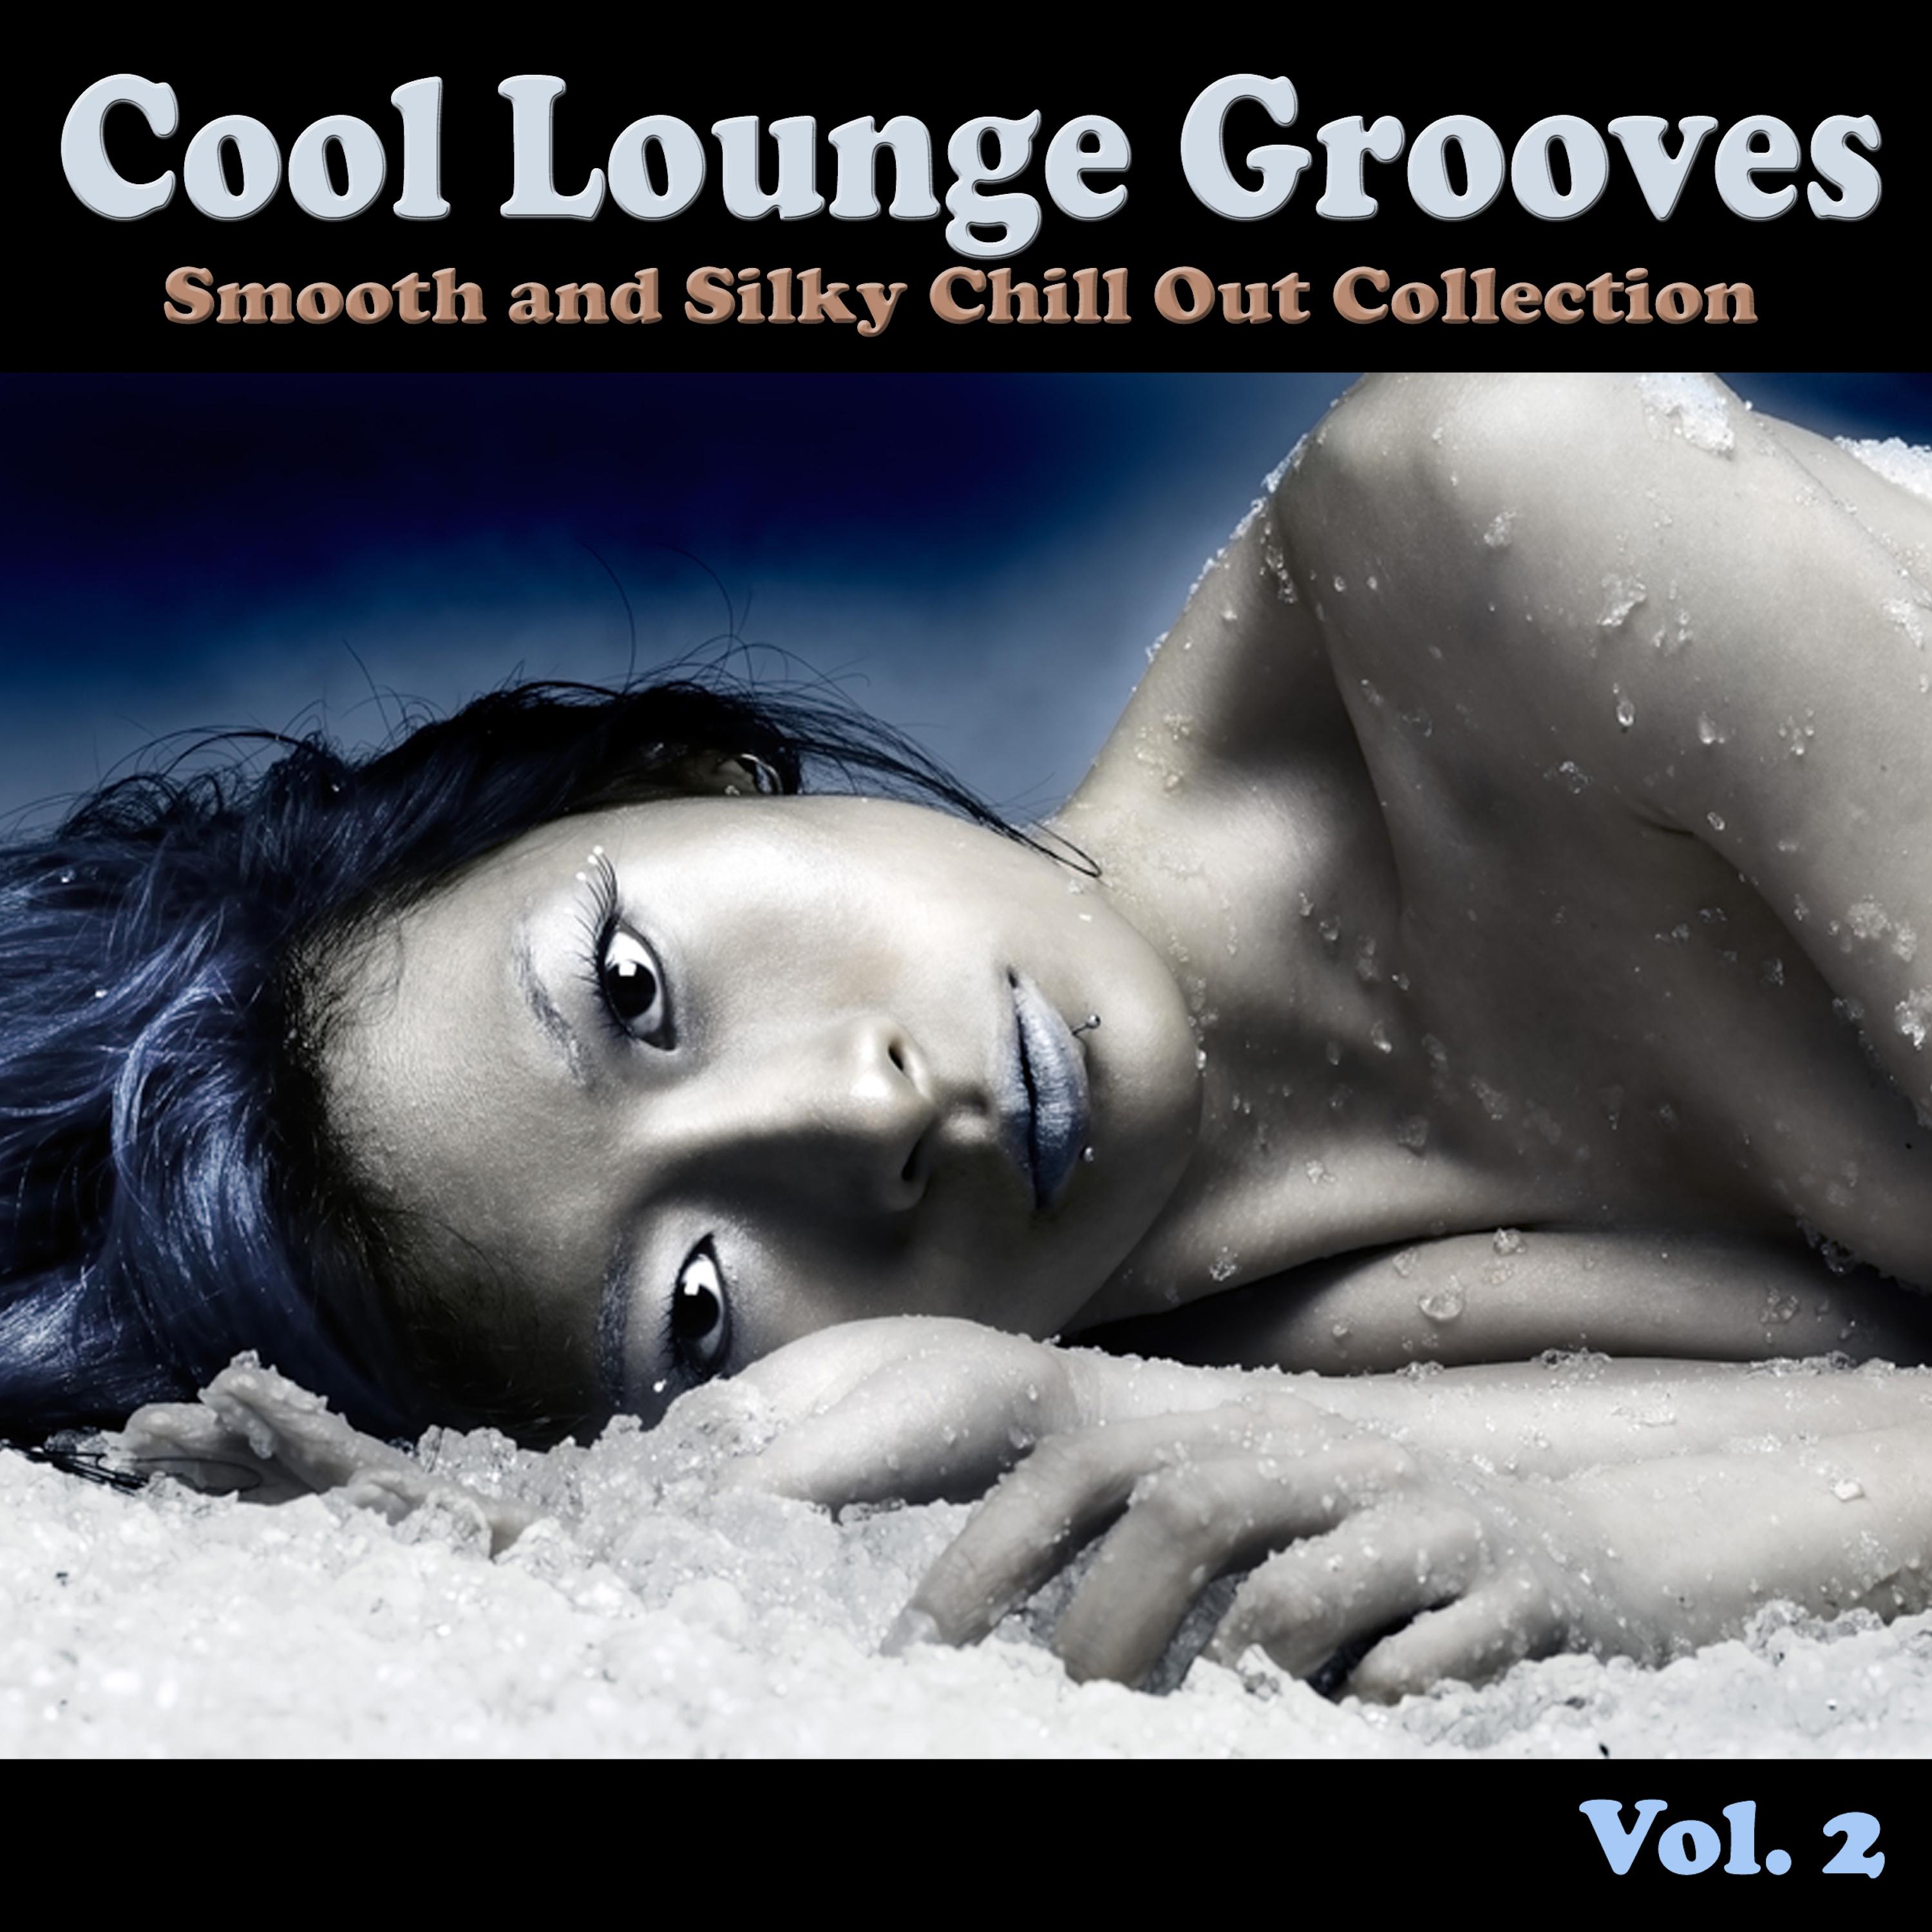 Cool Lounge Grooves, Vol. 2 - Smooth and Silky Chill Out Collection